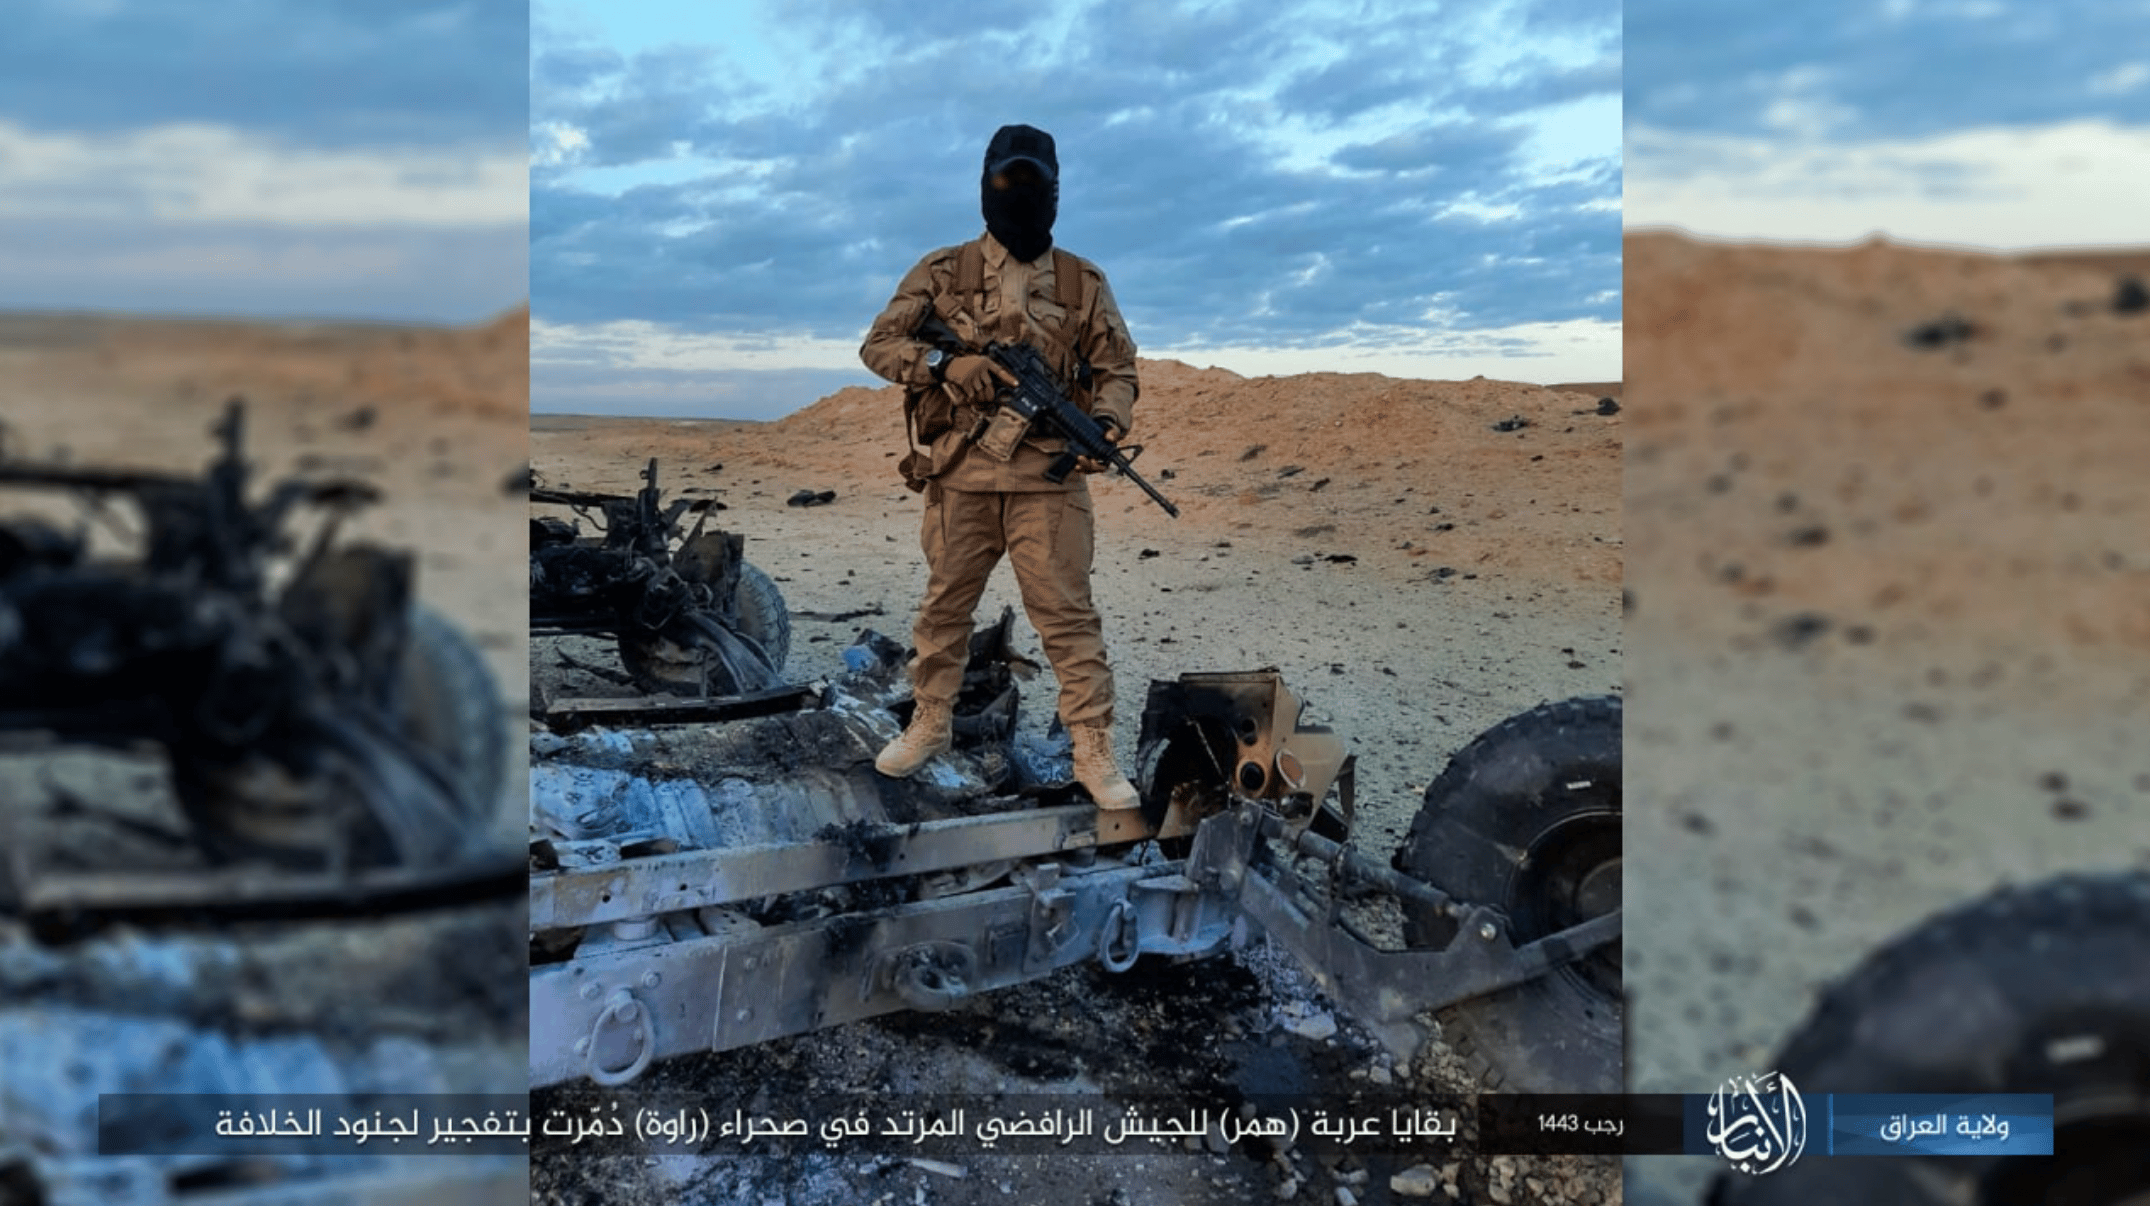 Islamic State: An IED Was Detonated On An Iraqi Army Hummer, Destroying It And Killing 5 People, Rawa Desert, West of Anbar, Iraq